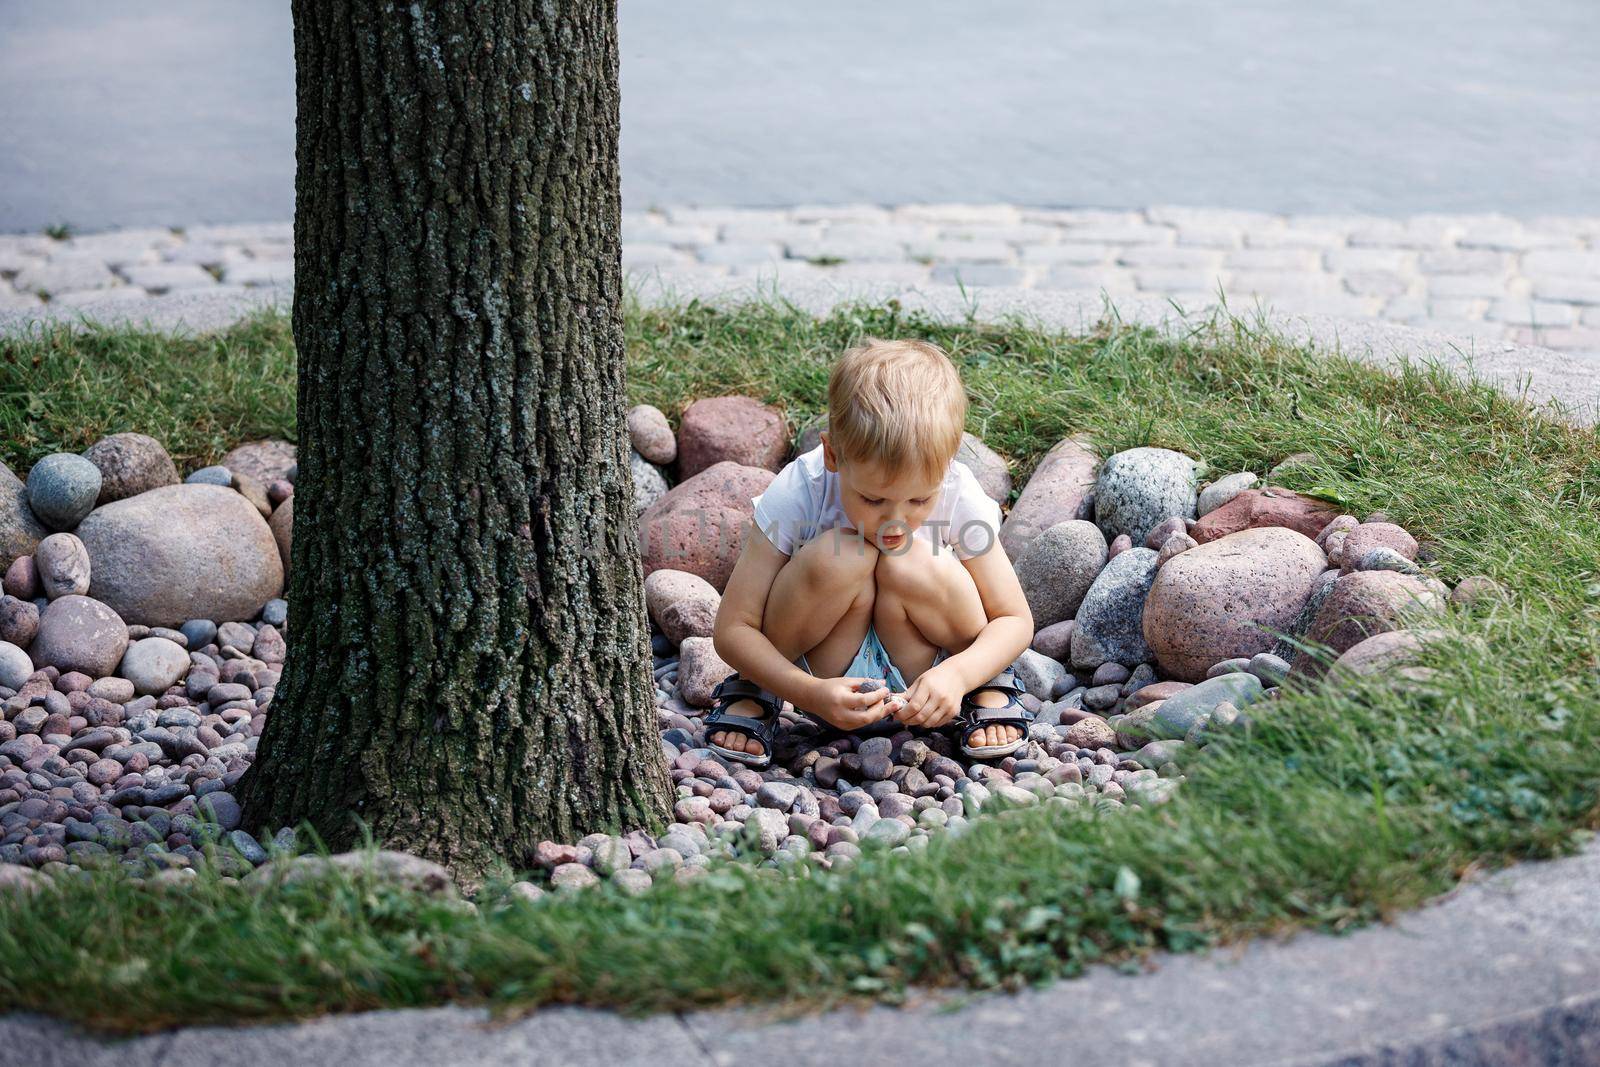 A little boy squats by a large tree trunk and plays with pebbles.